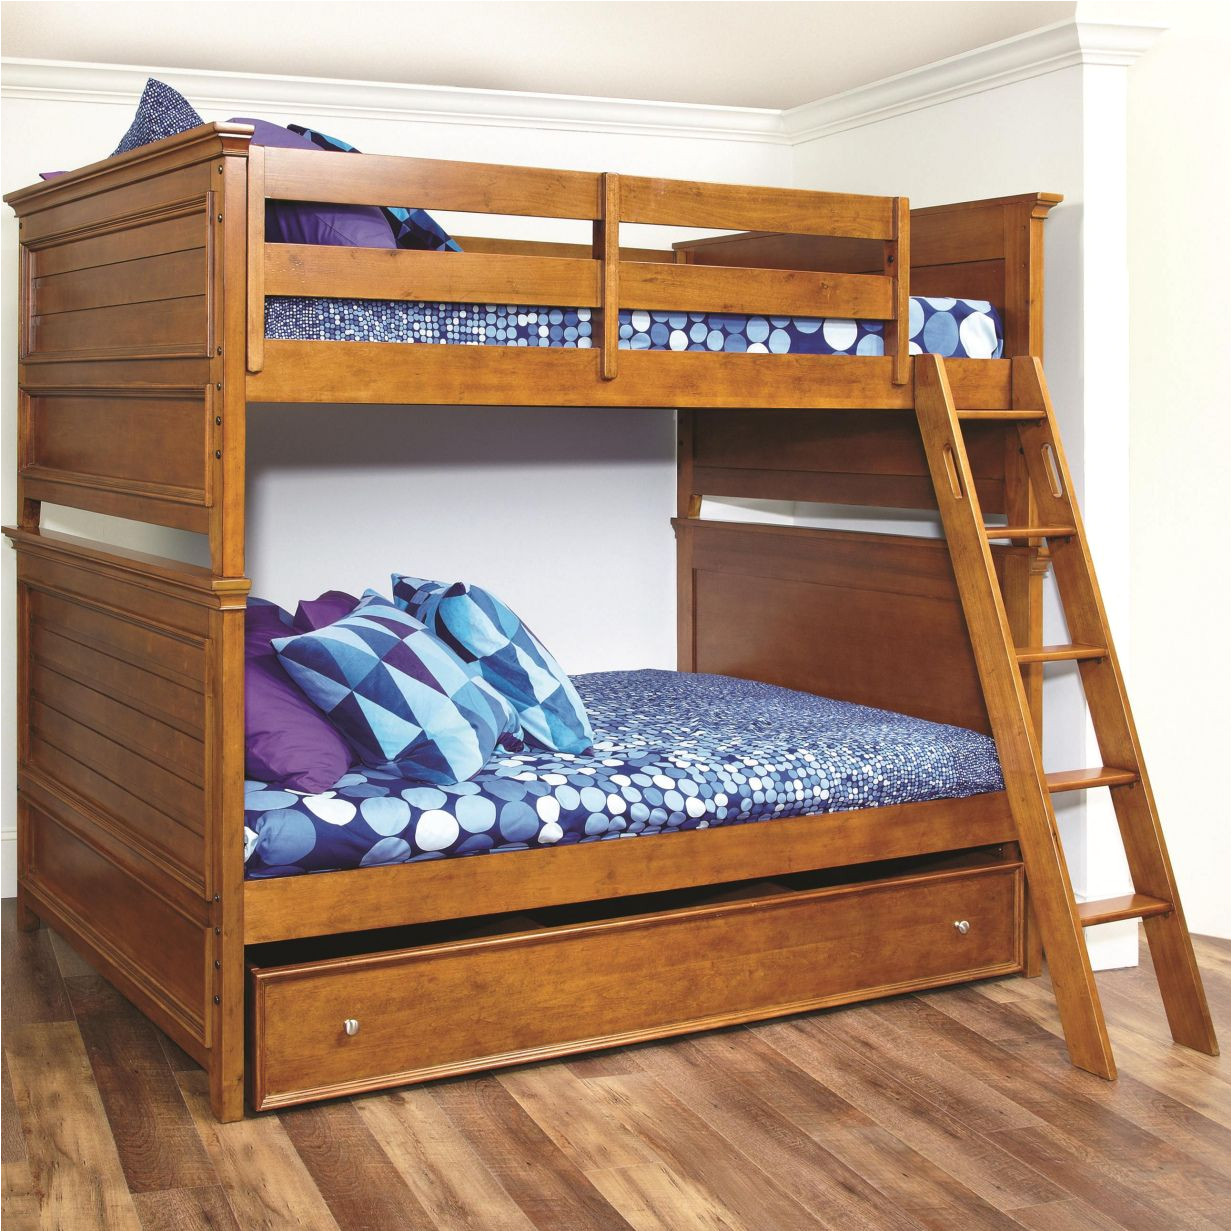 Allentown Bunk Bed assembly Instructions Pdf AdinaPorter